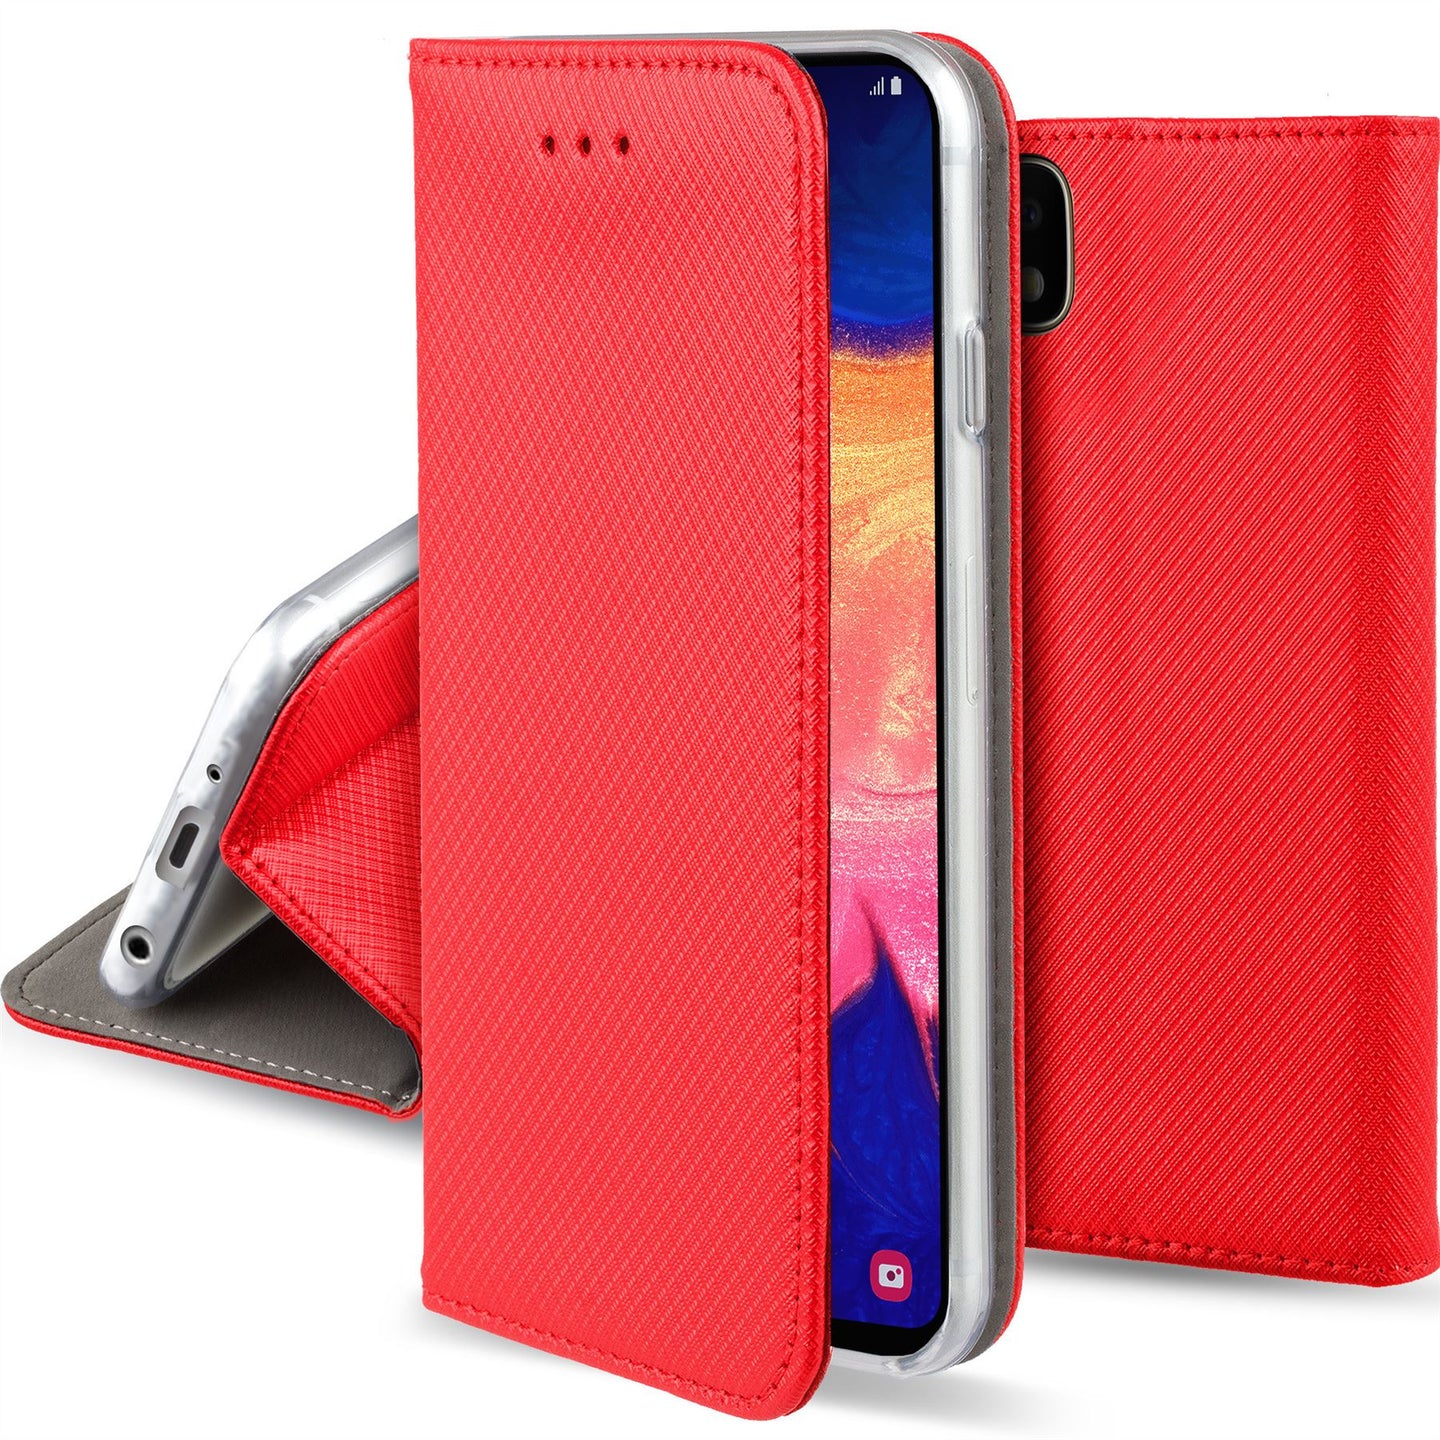 Moozy Case Flip Cover for Samsung A10, Red - Smart Magnetic Flip Case with Card Holder and Stand